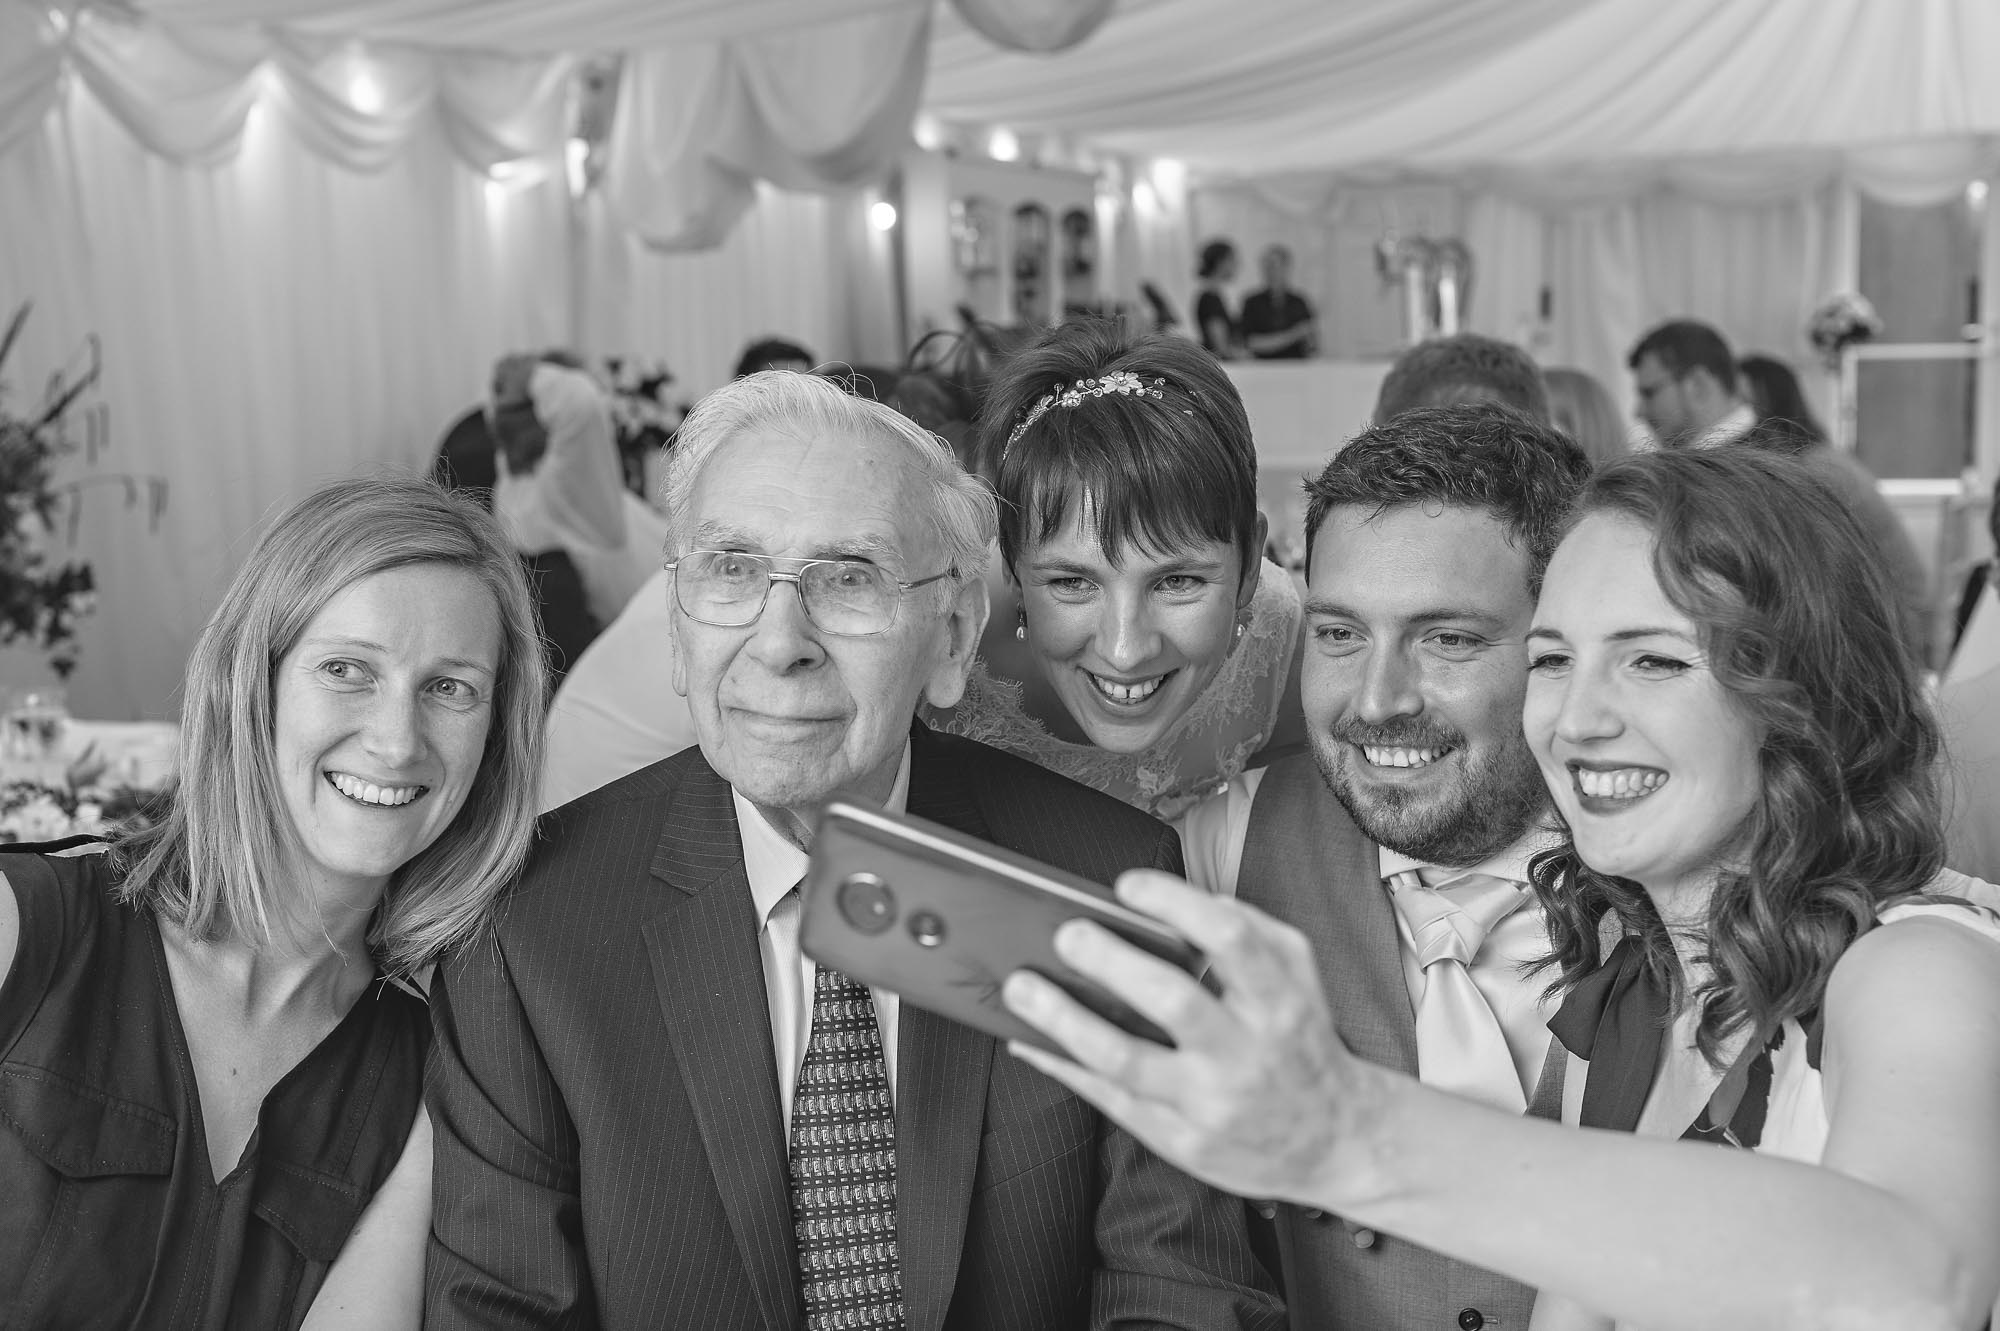 The bride, groom and three guests taking selfie at wedding